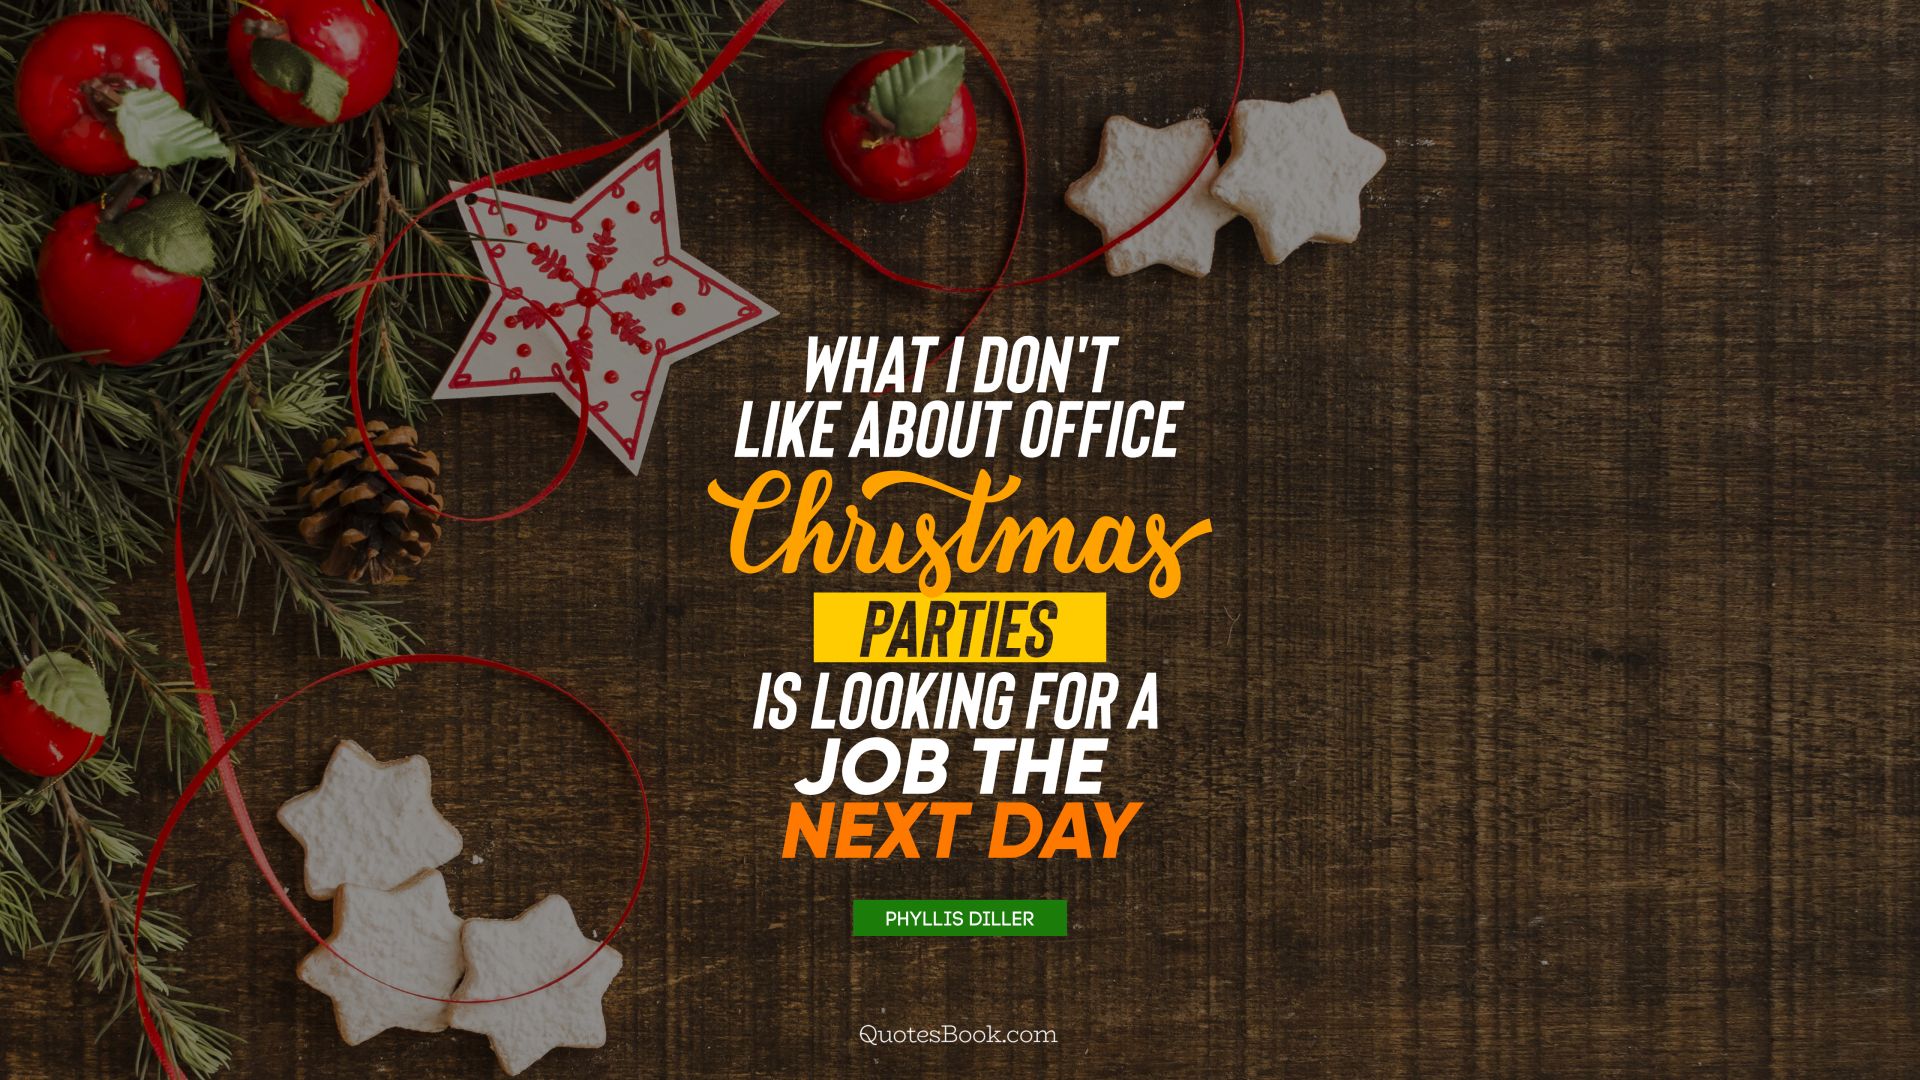 What I don't like about office Christmas parties is looking for a job the next day. - Quote by Phyllis Diller